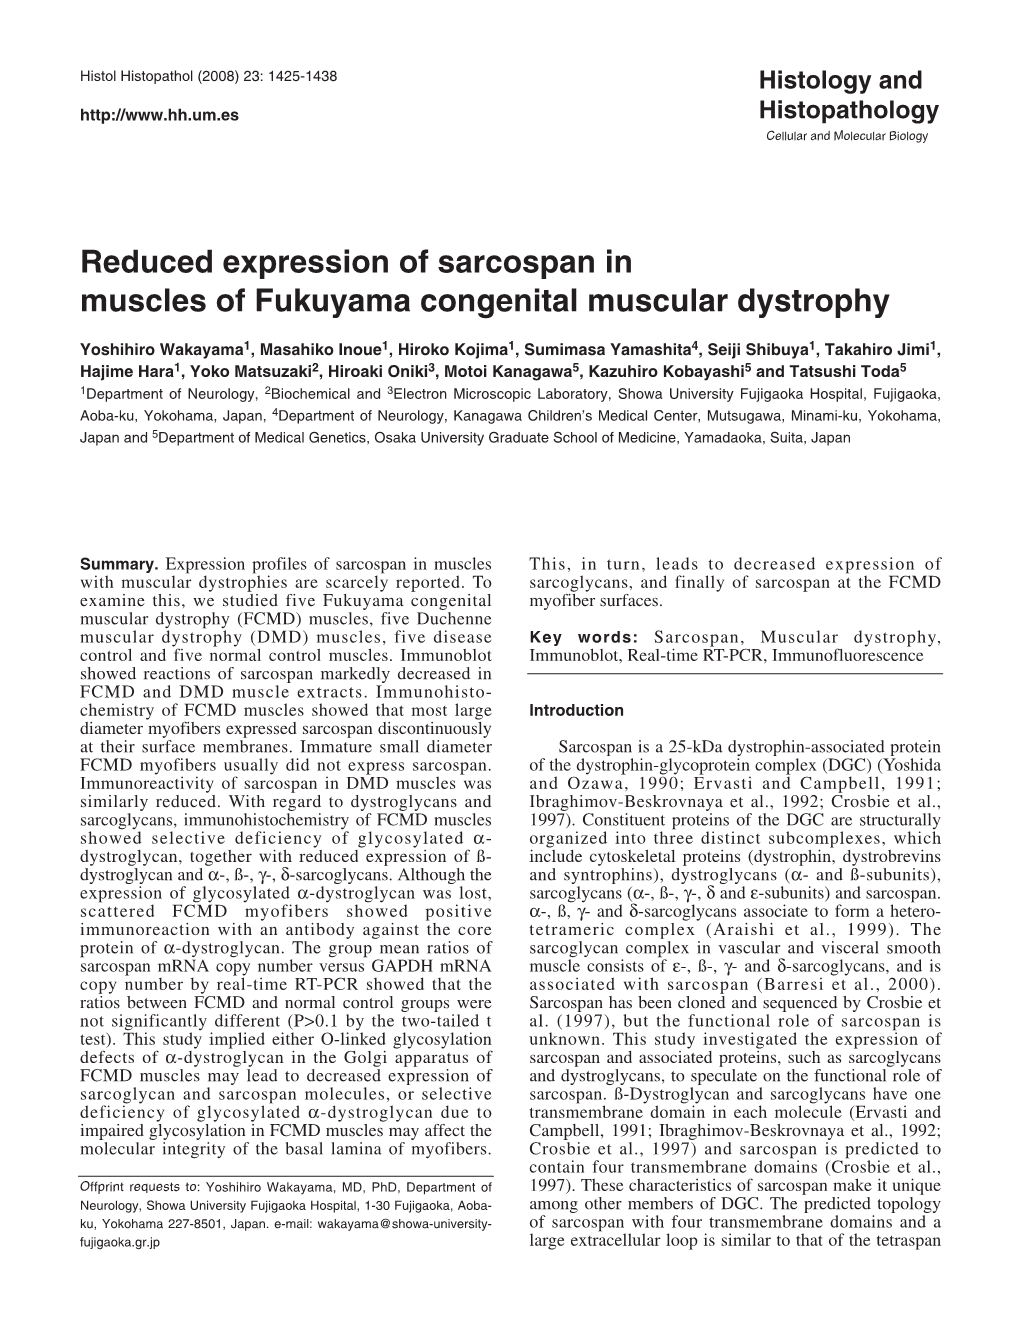 Reduced Expression of Sarcospan in Muscles of Fukuyama Congenital Muscular Dystrophy